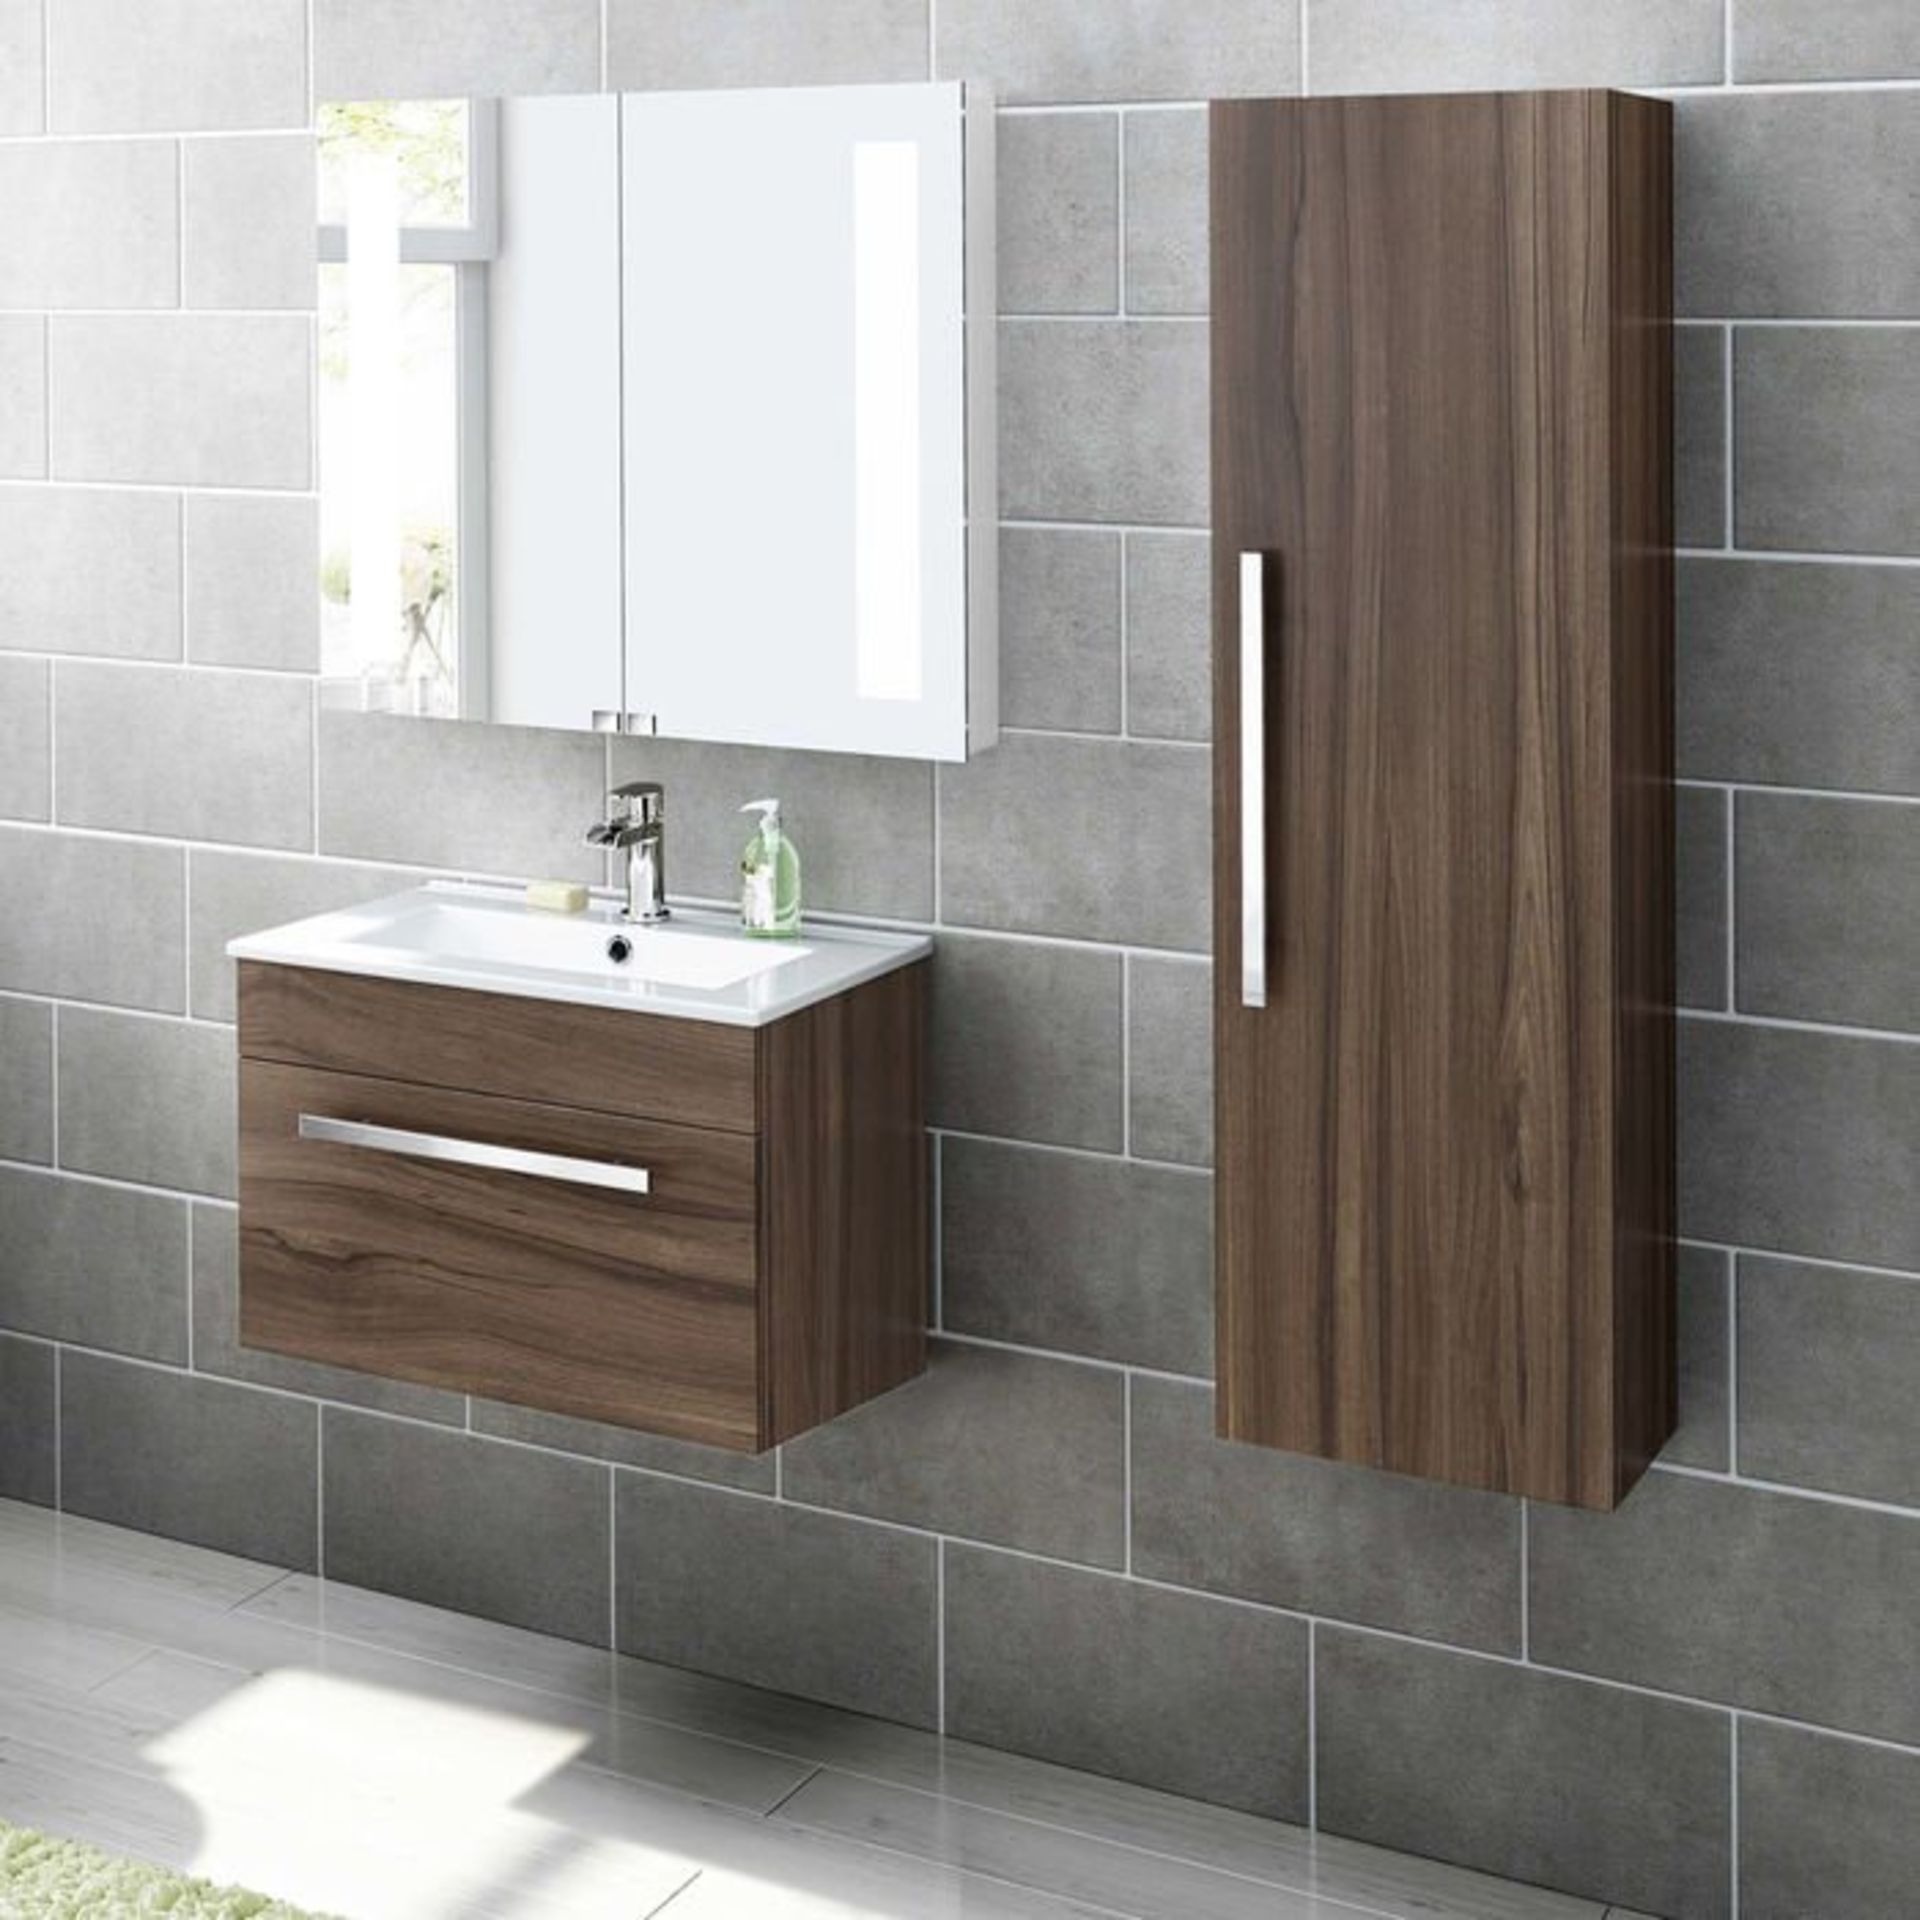 (G16) 1200mm Avon Walnut Effect Tall Storage Cabinet - Wall Hung RRP £274.99 Engineered with - Image 4 of 6